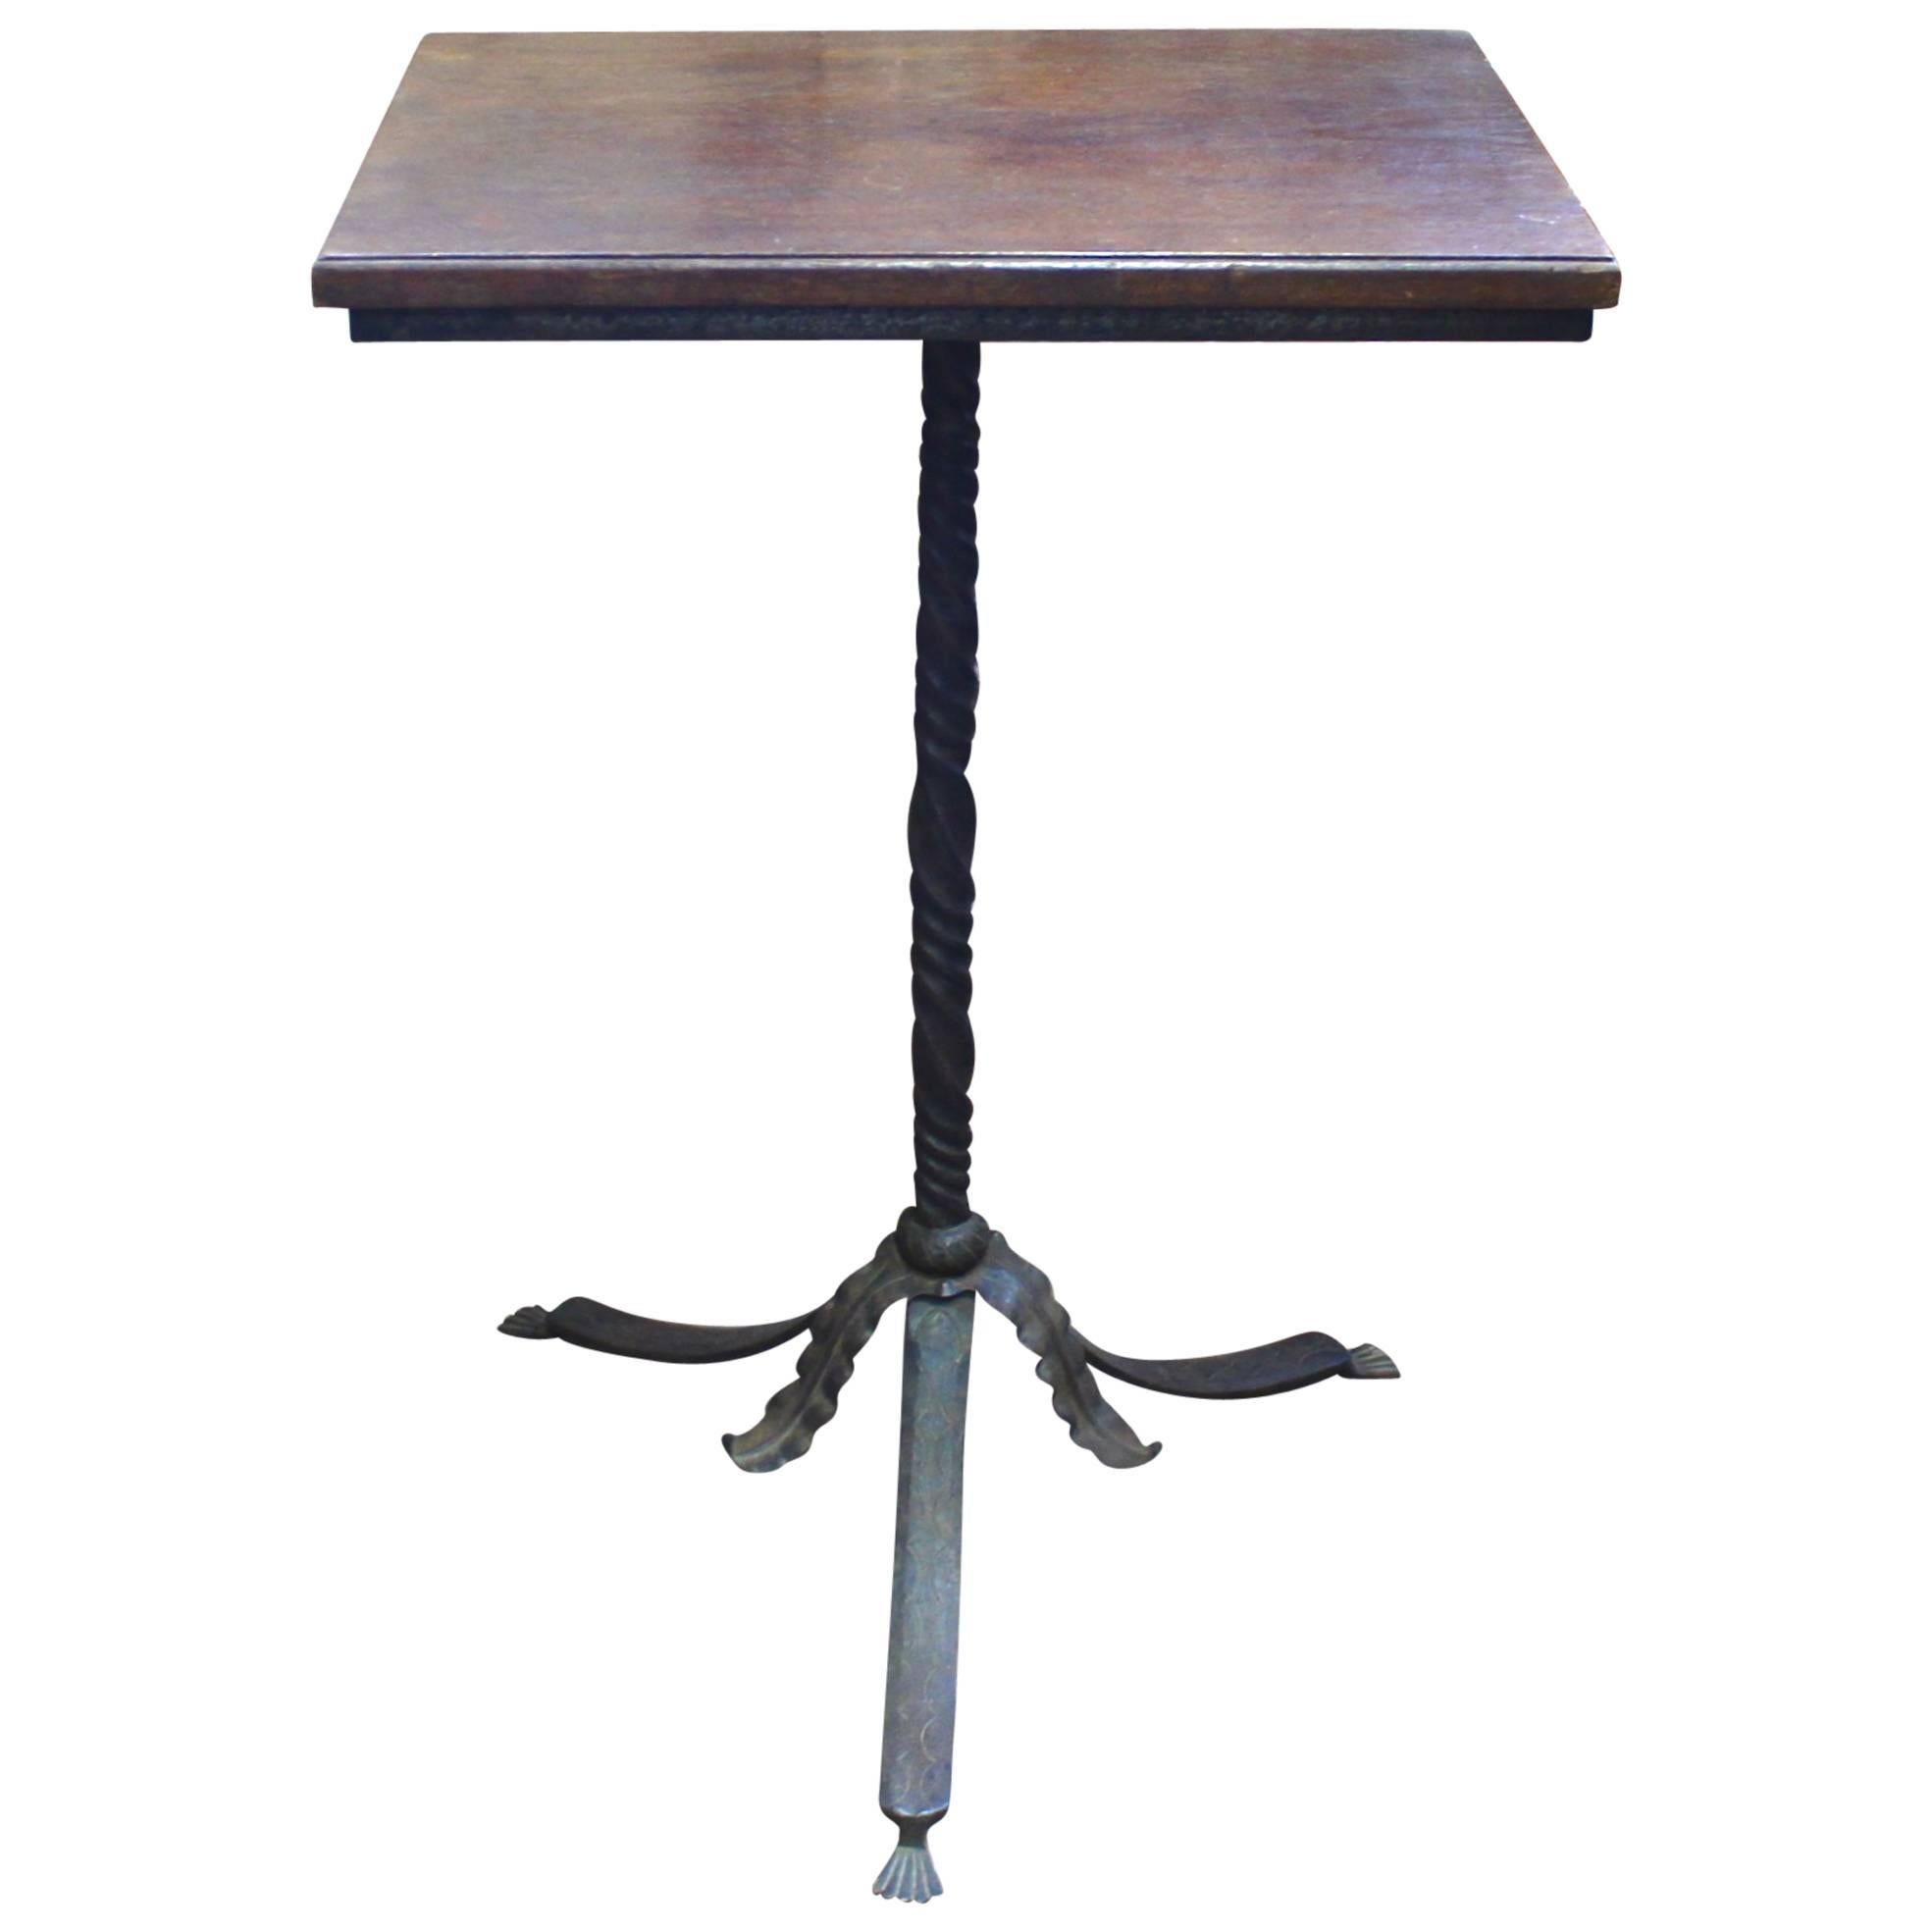 Neo-Gothic Hand Wrought Iron Pedestal Base Walnut Top Side Table or Stand